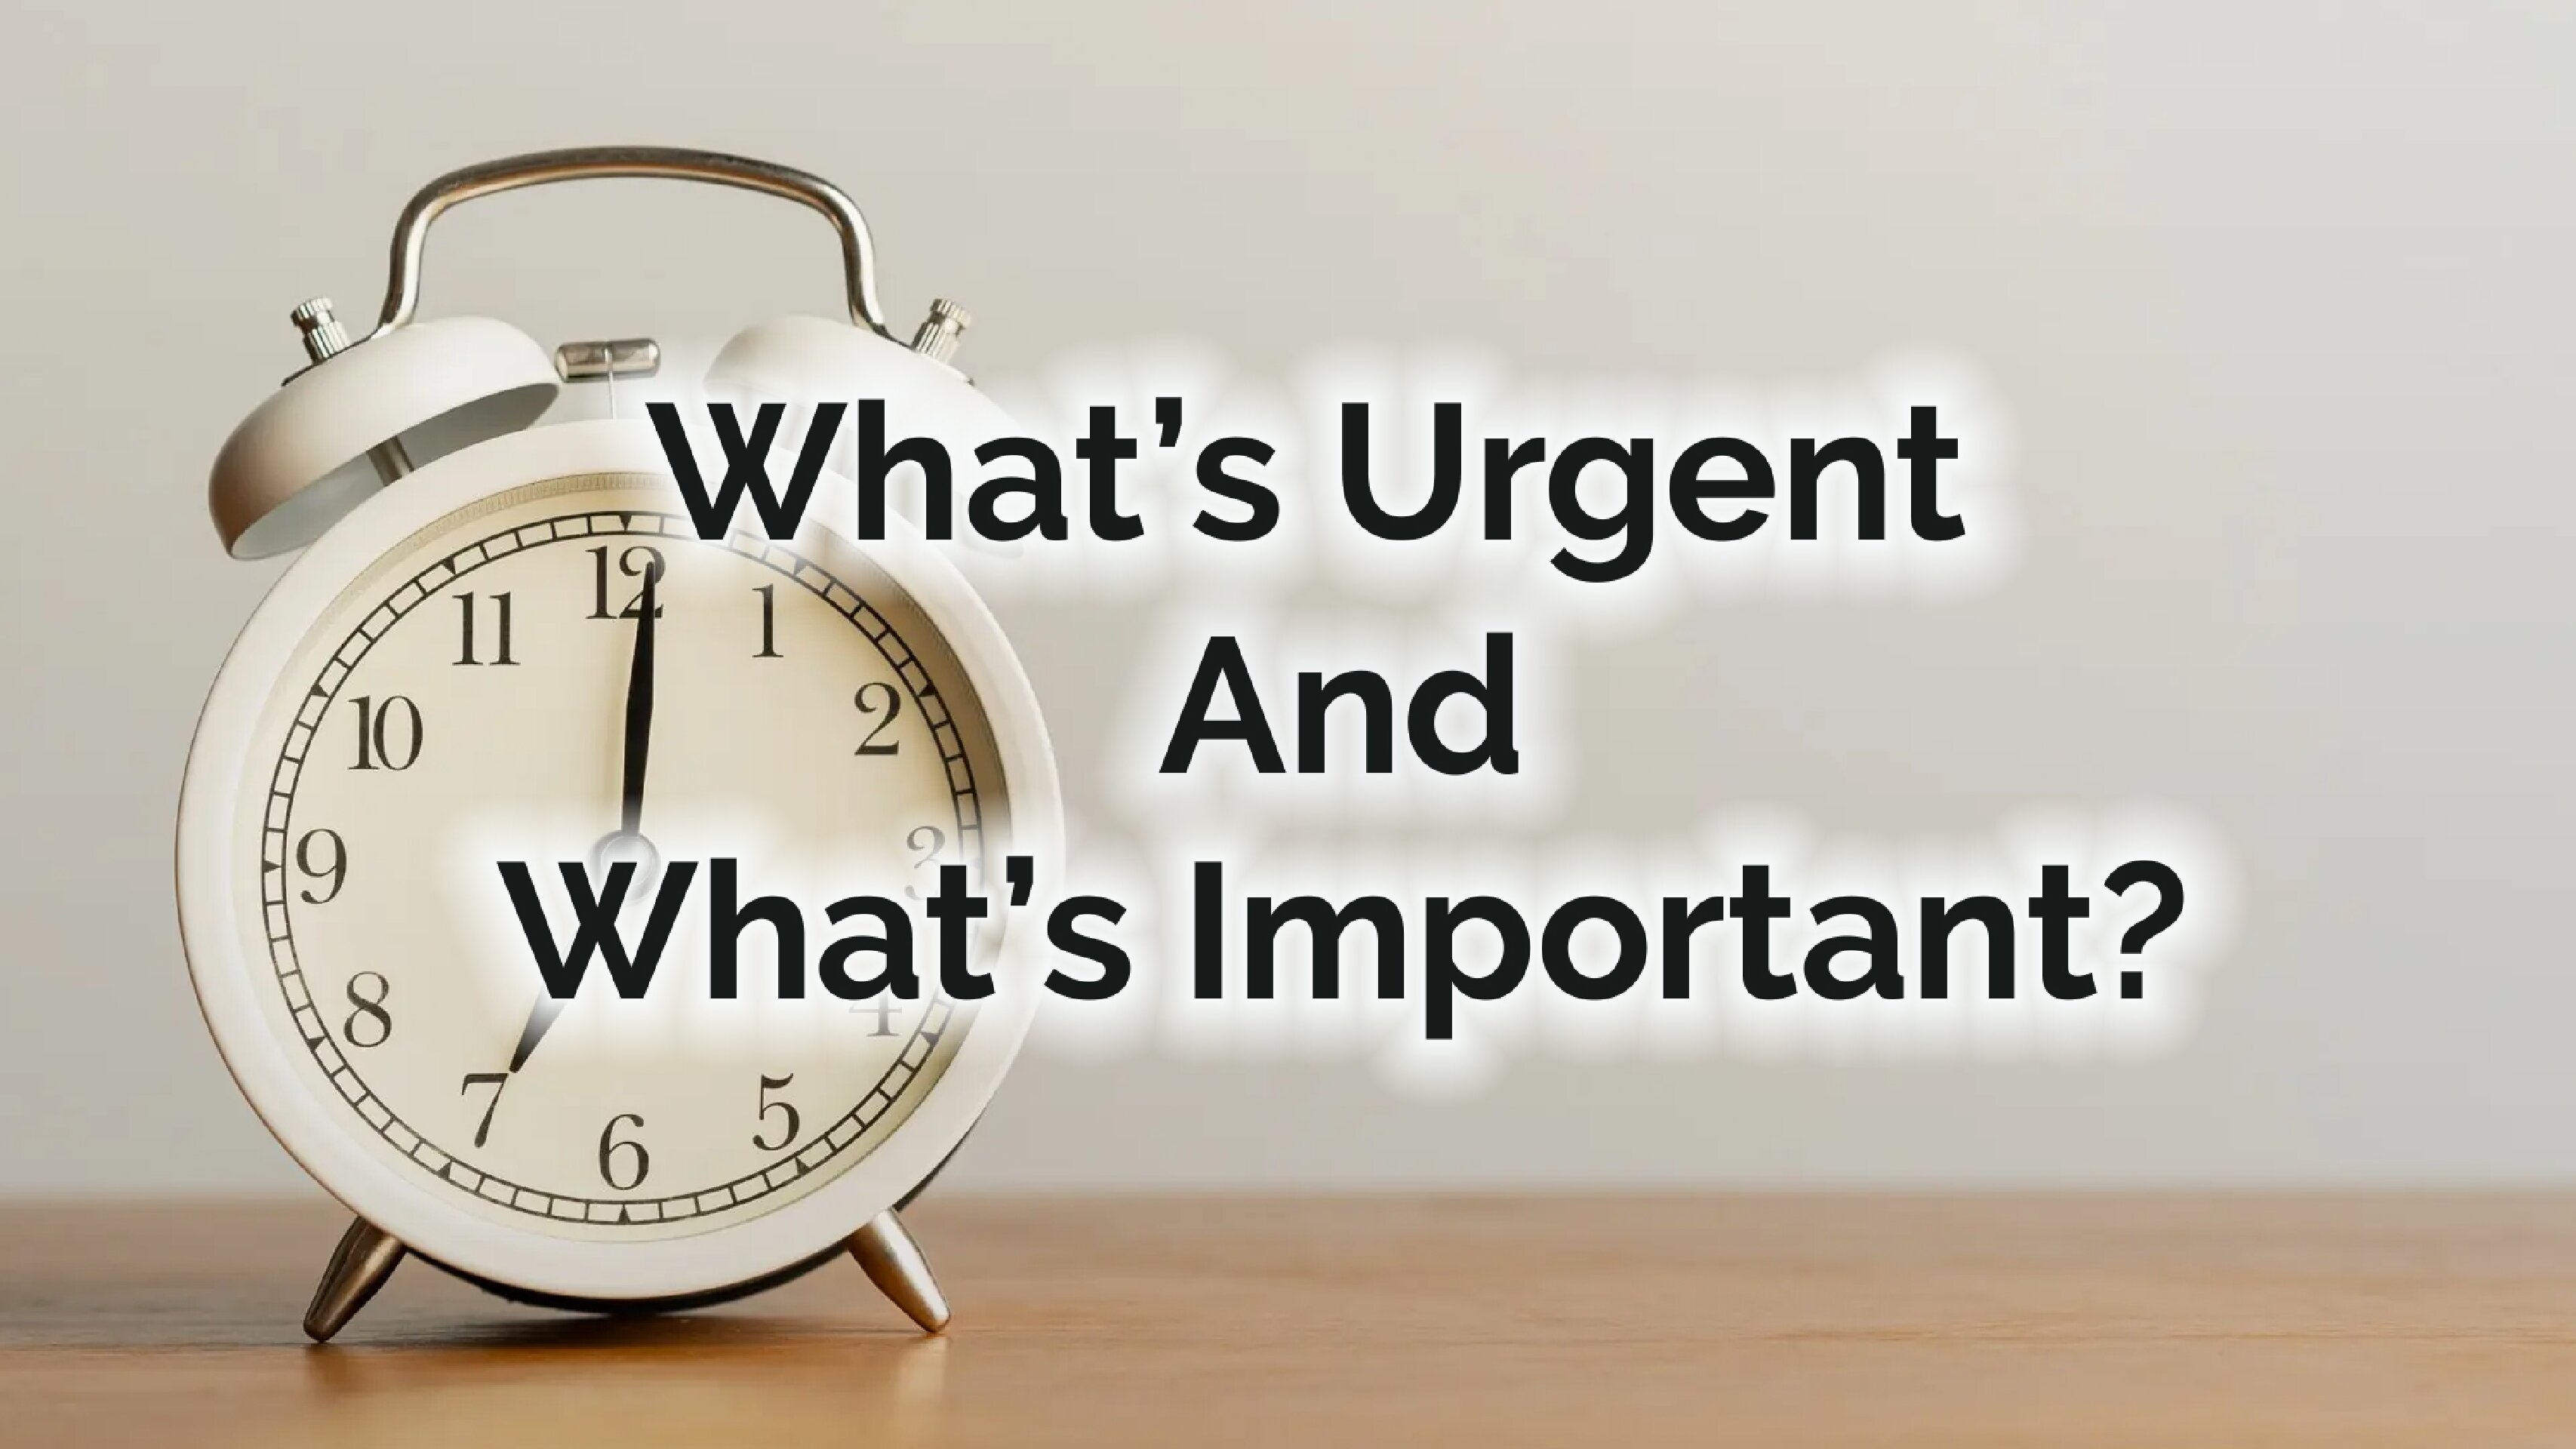 What’s Urgent and What’s Important?